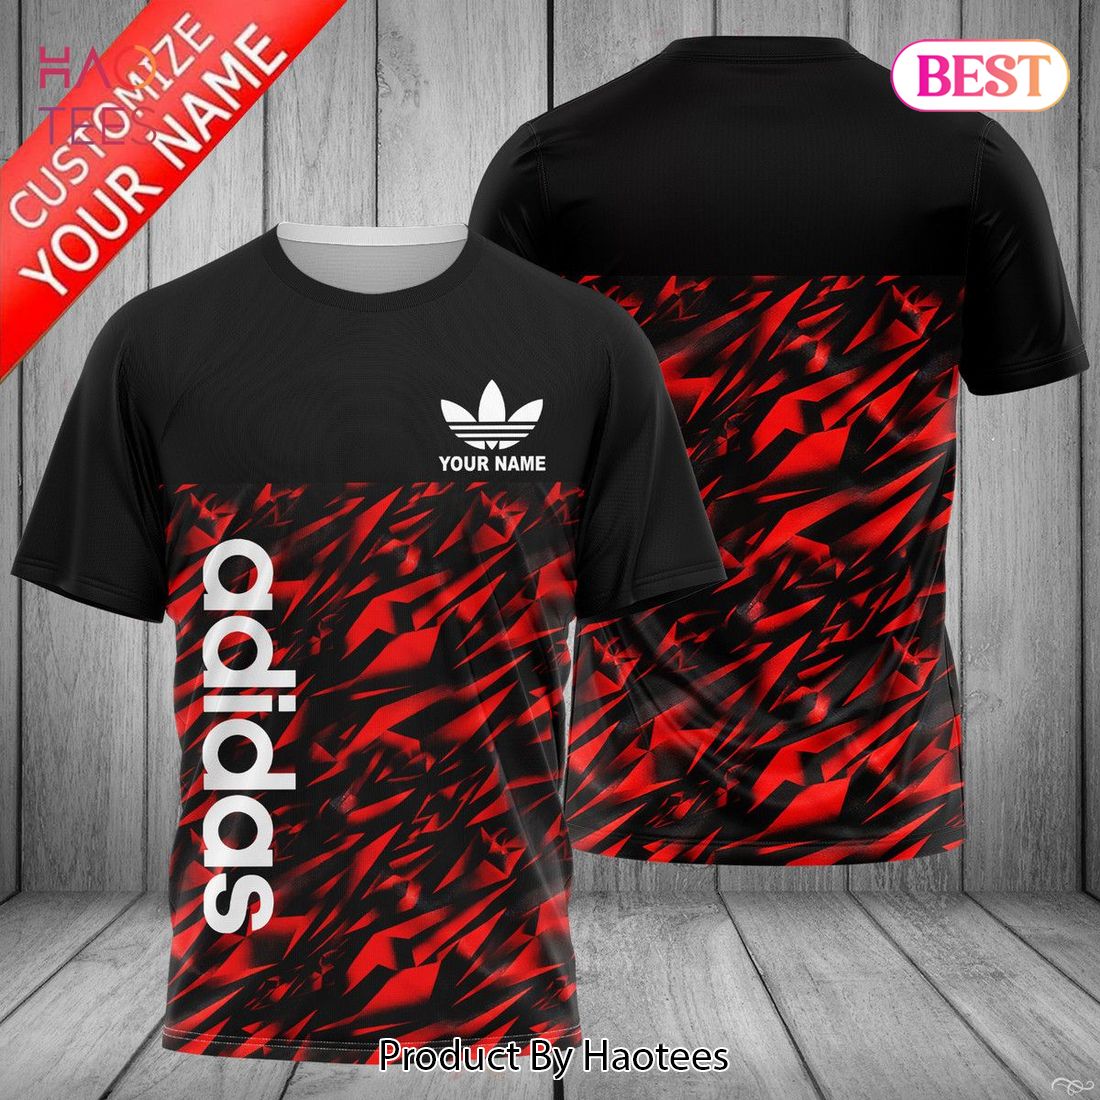 HOT Adidas Luxury Brand Red Black 3D T-Shirt Limited Edition